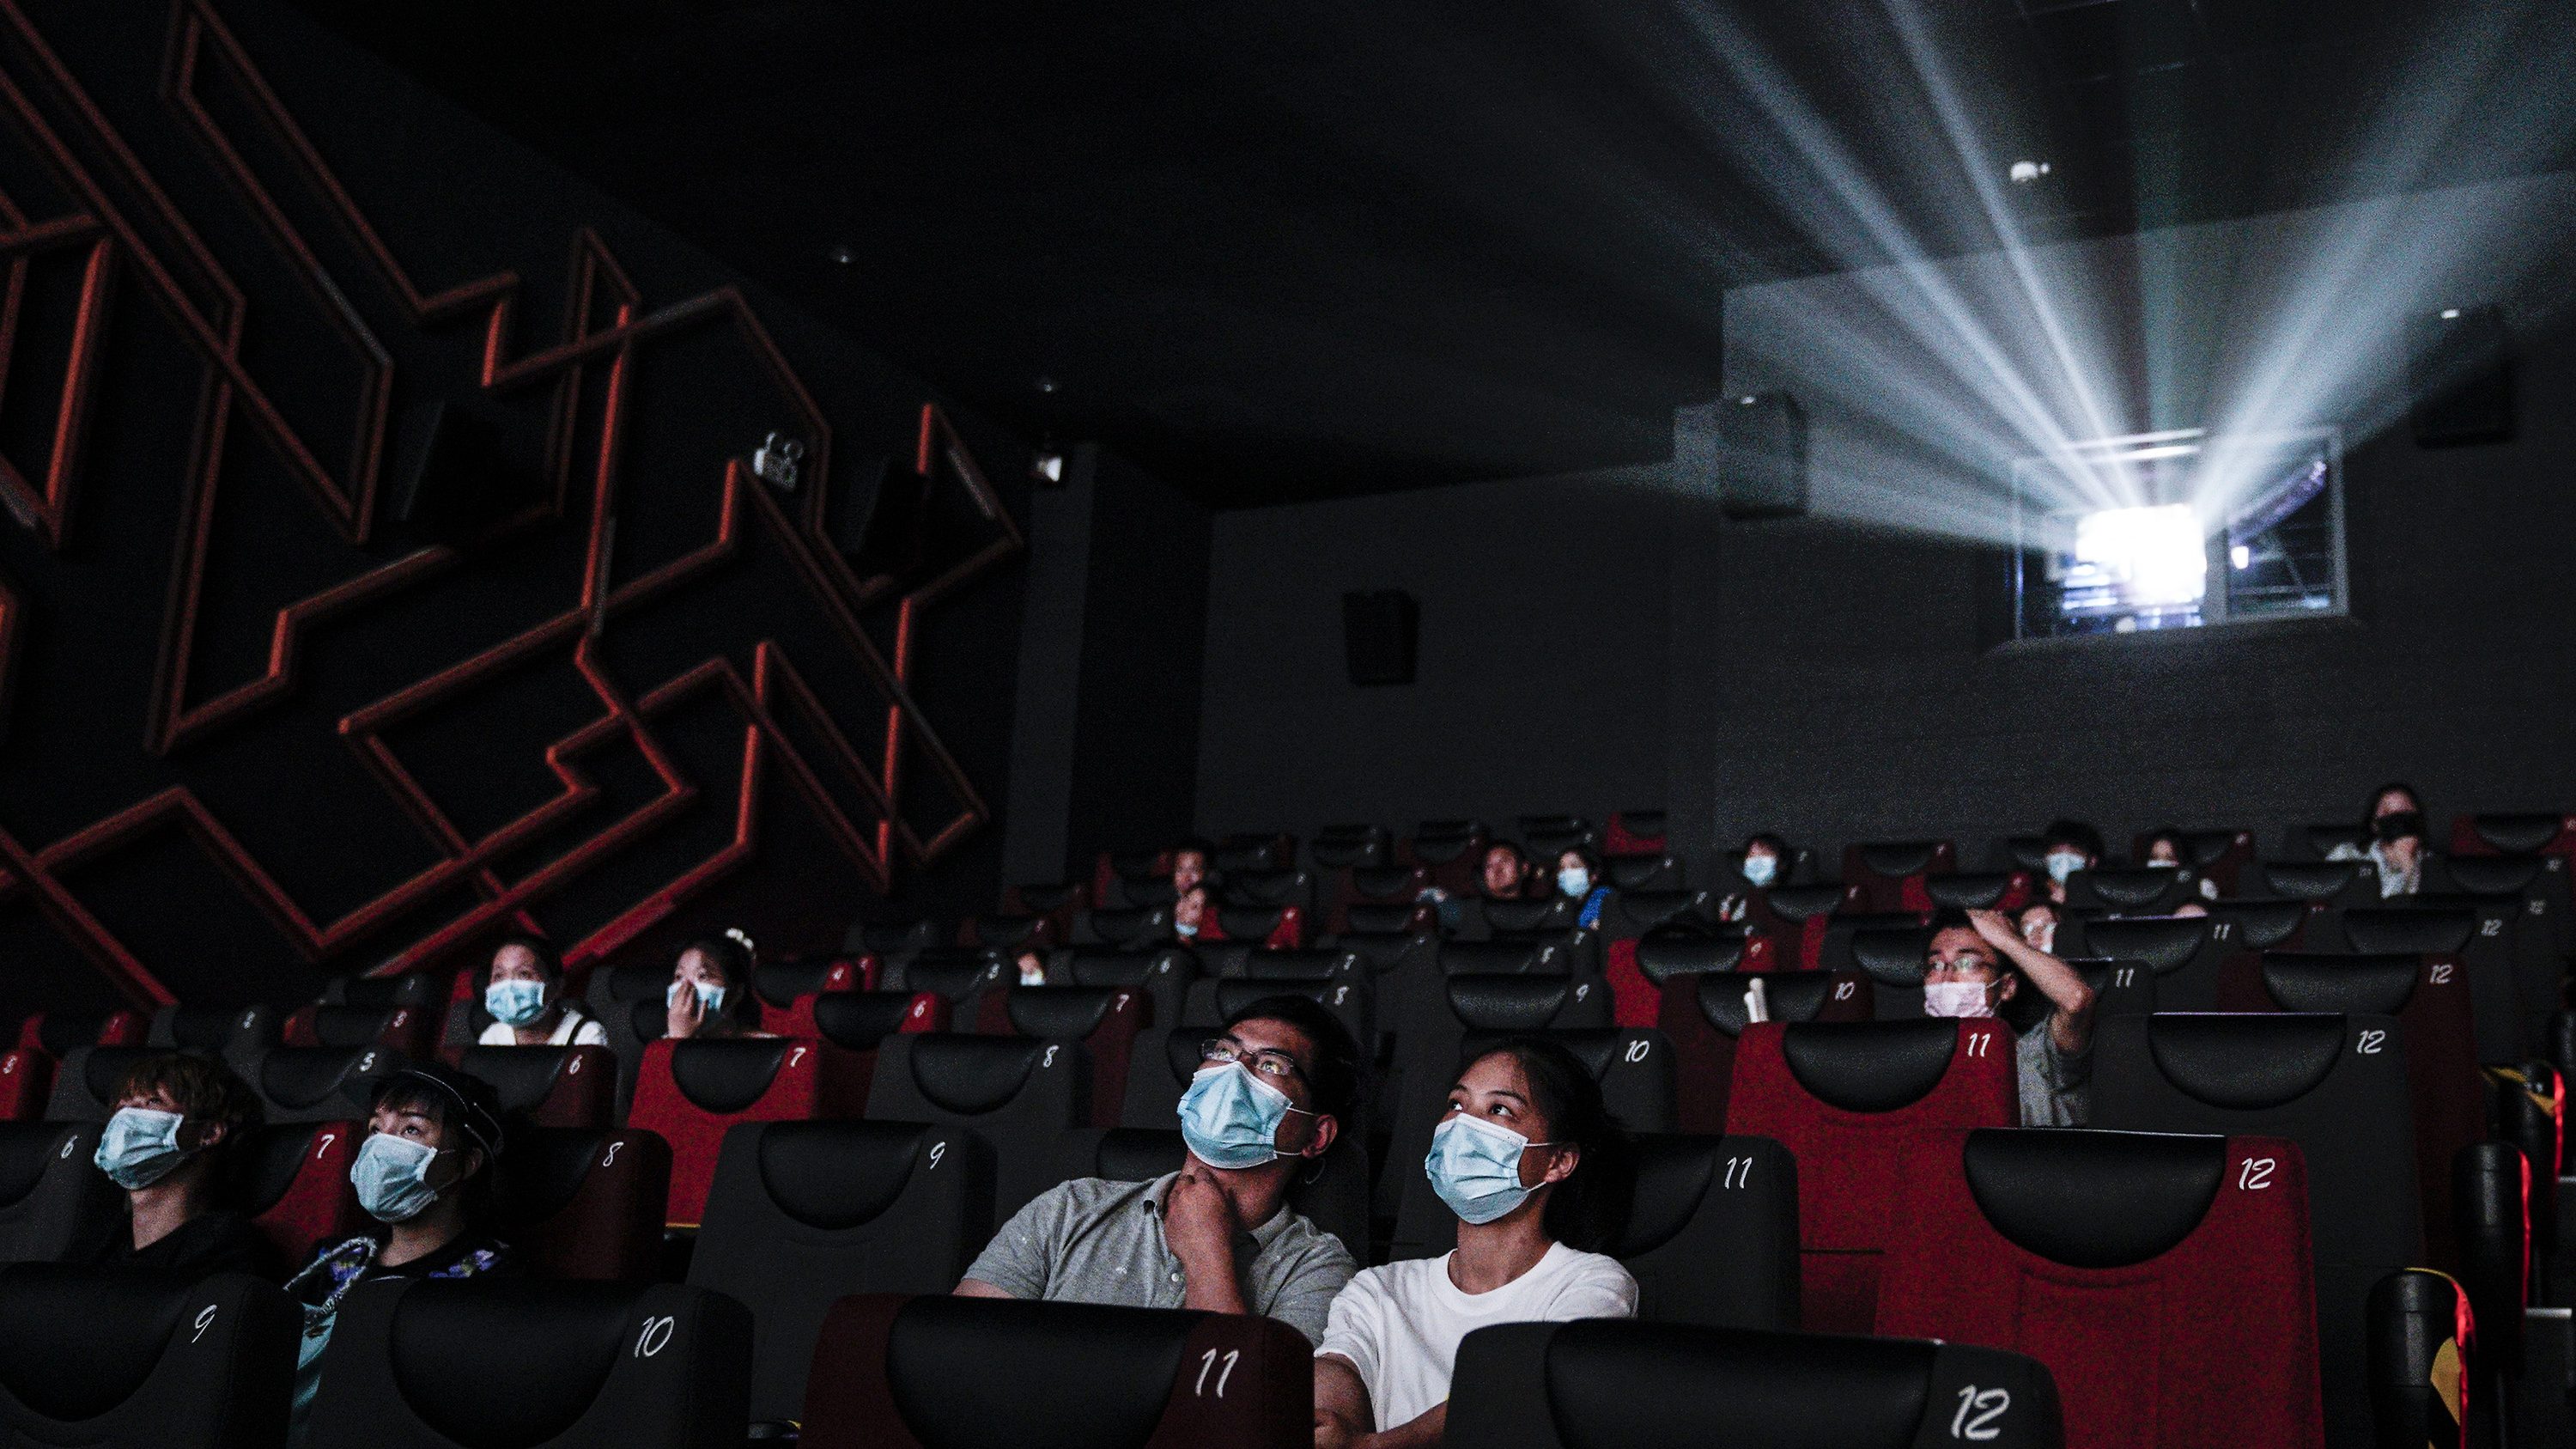 Movie theaters still offer joy in streaming-driven world - Marketplace